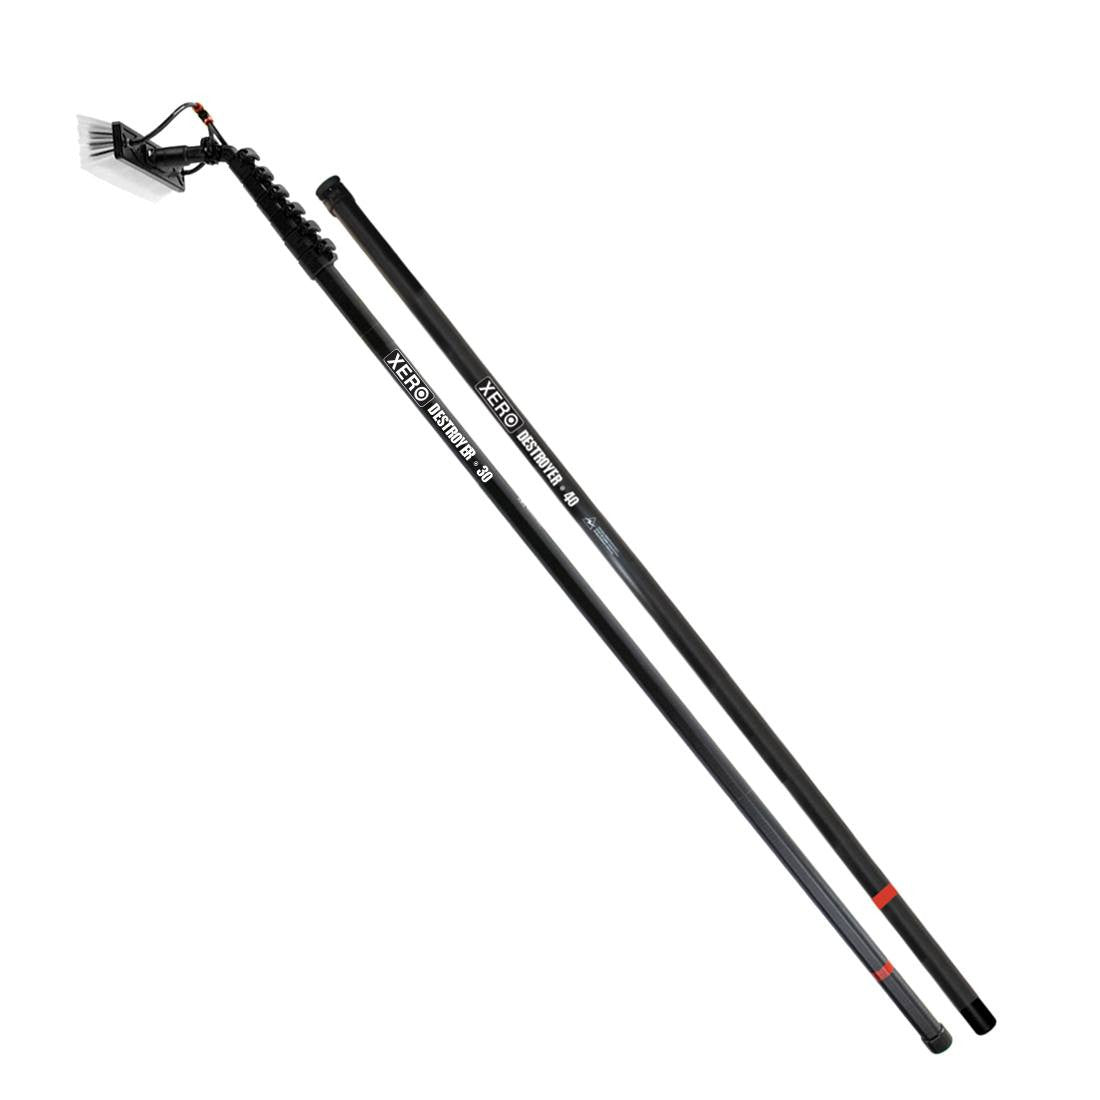 The XERO Destroyer Water Fed Pole 40 foot kit